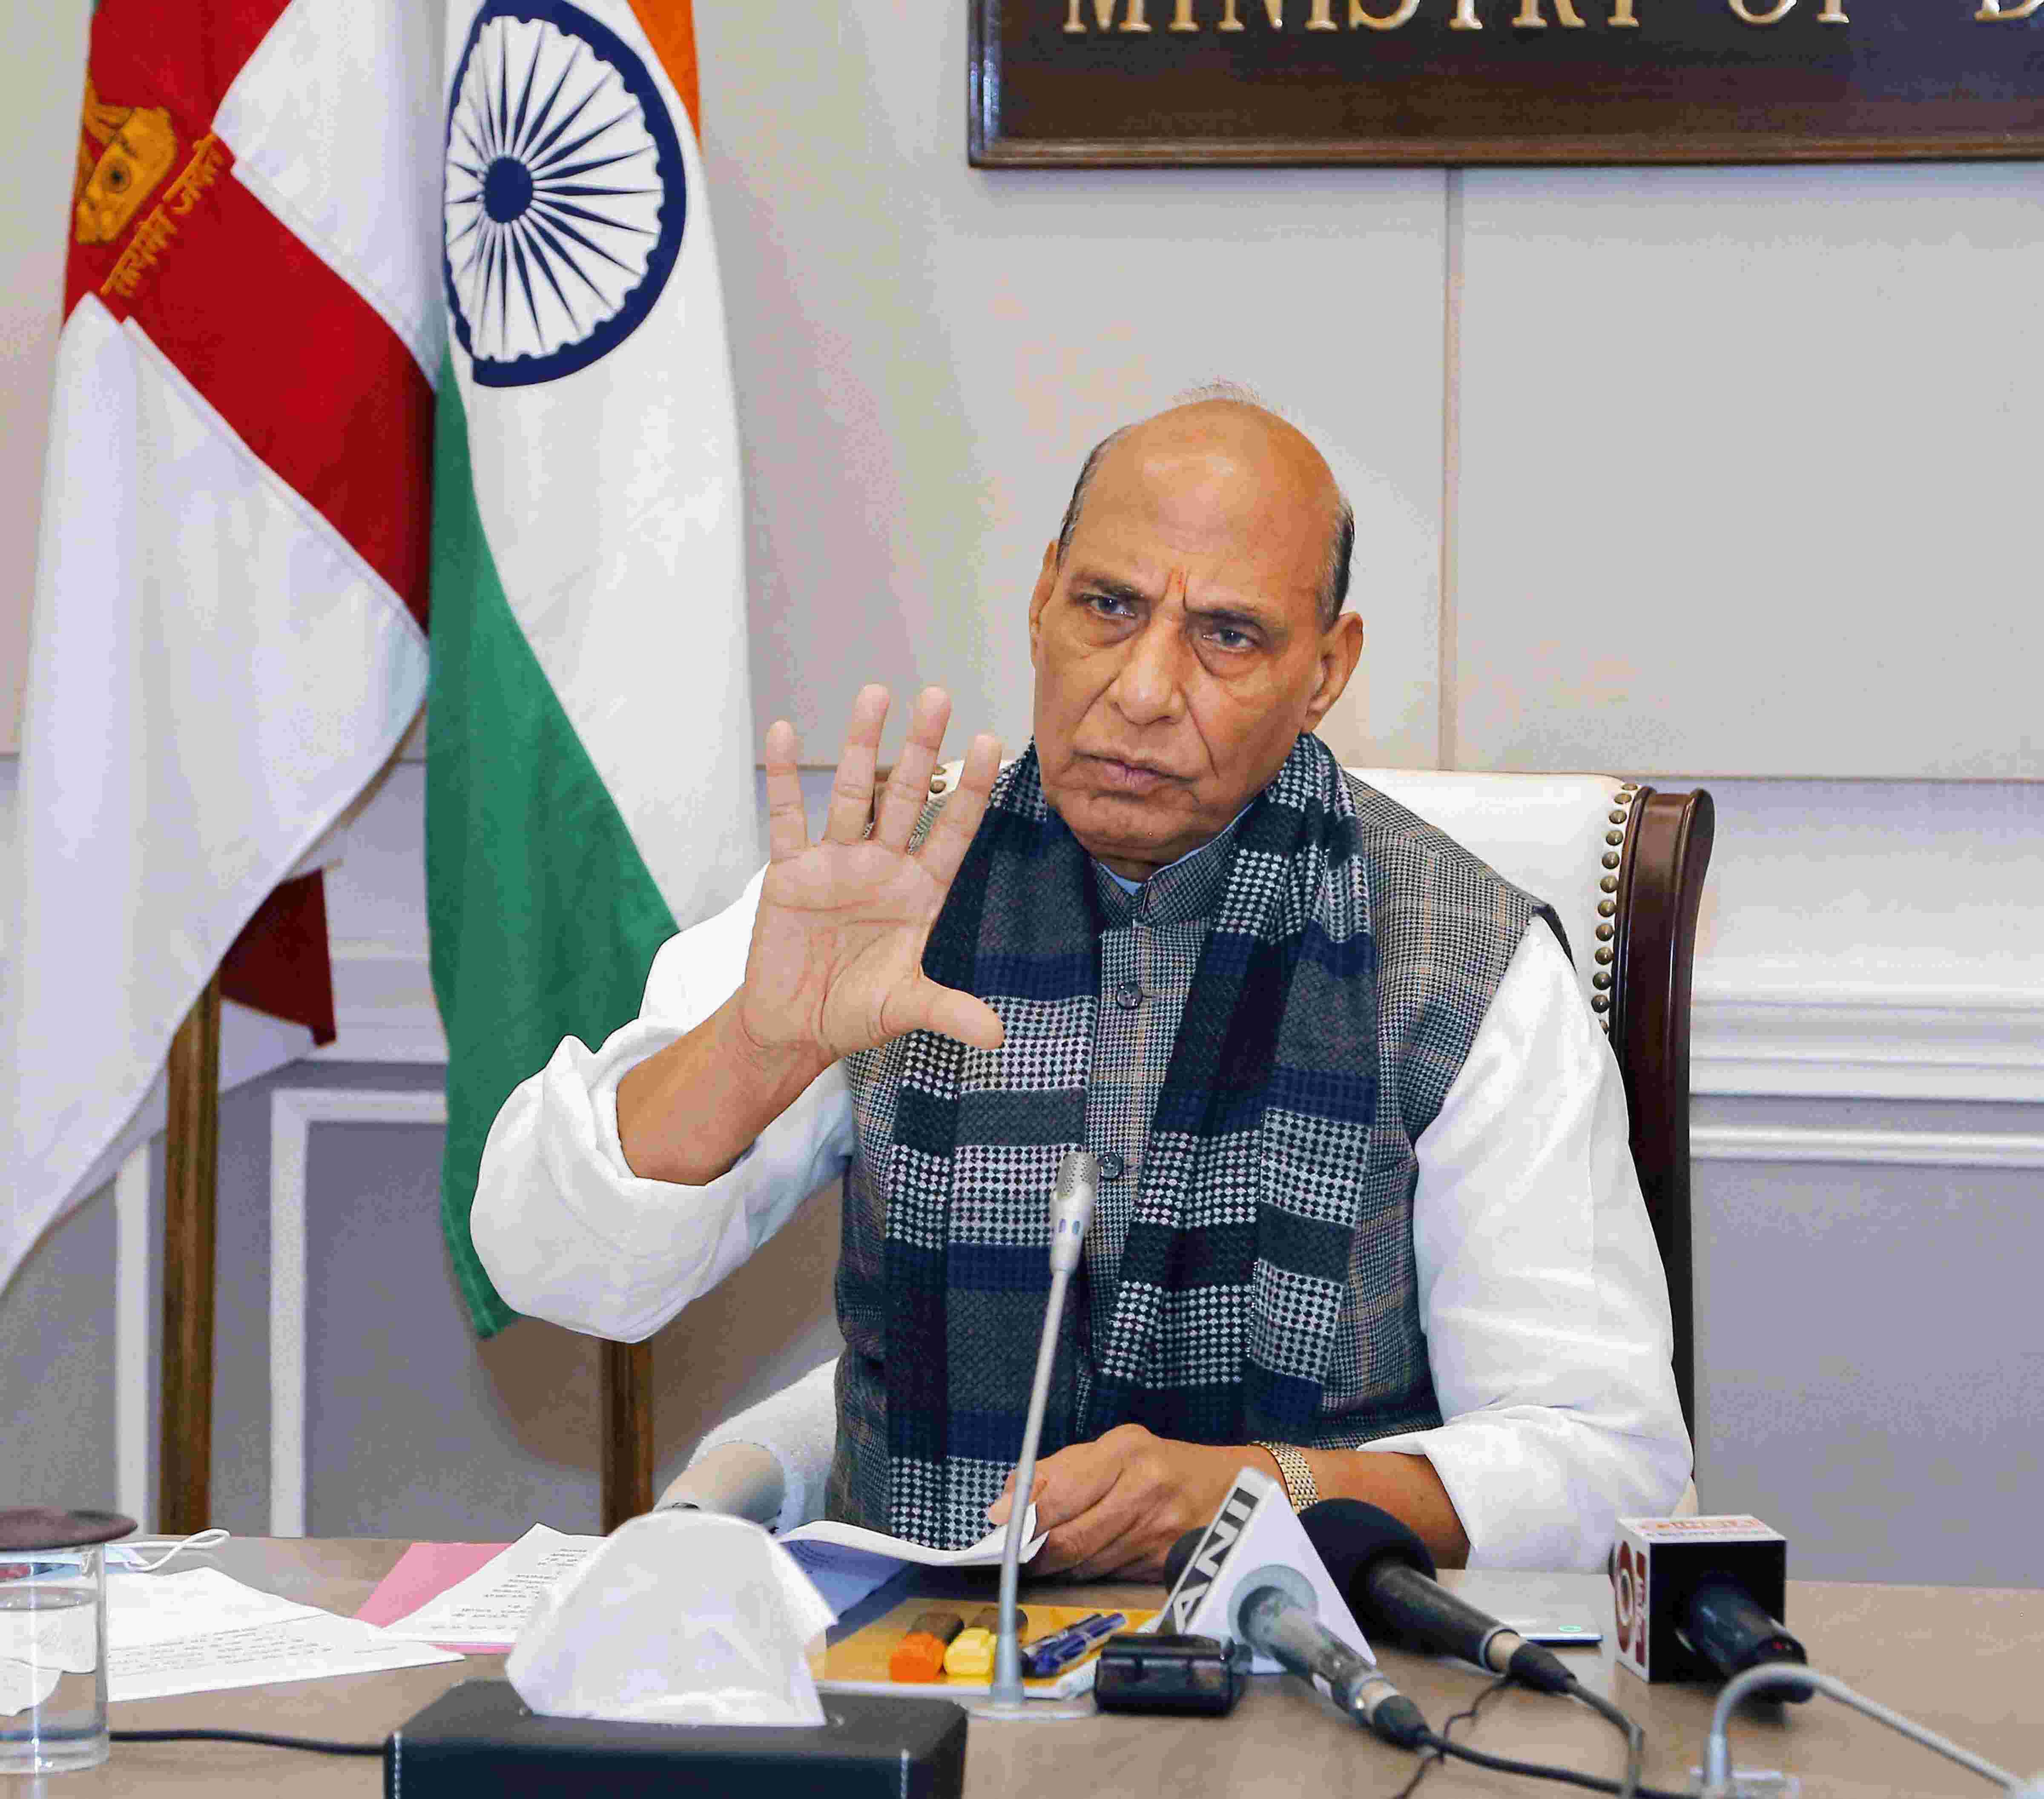 Process for appointment of CDS underway: Rajnath